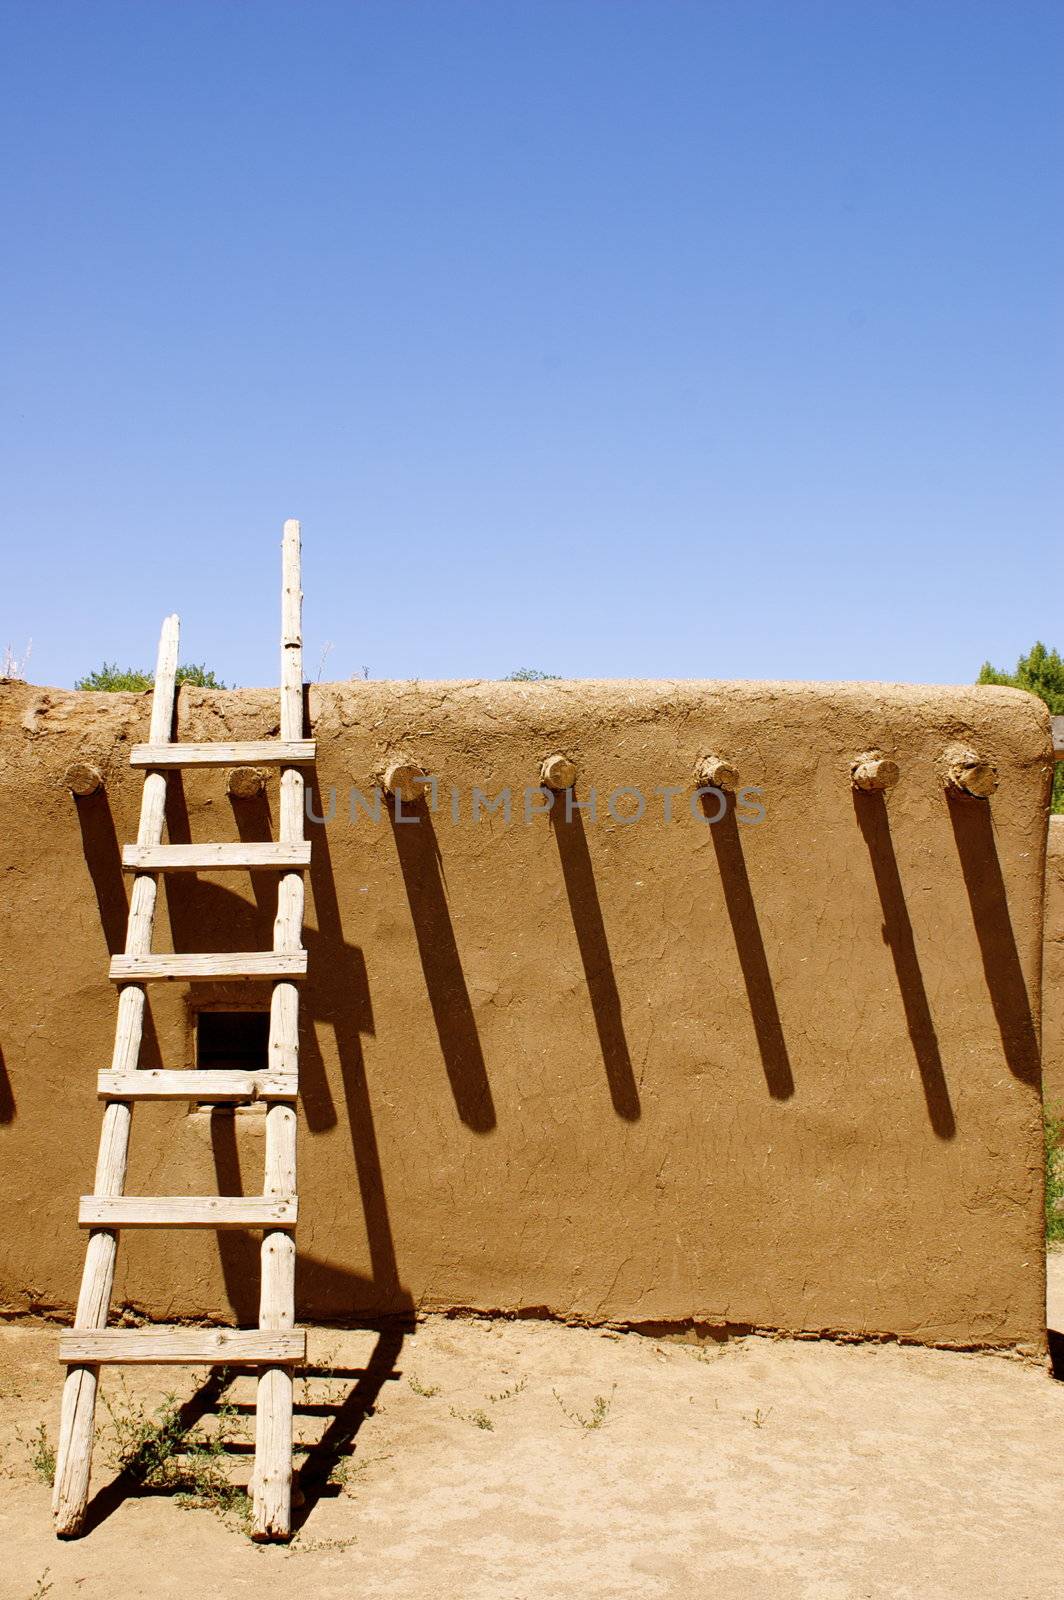 New Mexican Adobe Pueblo Building, featuring a ladder and shadows, on a native American Indian reservation (outside Taos), against a deep blue sky with copy space.